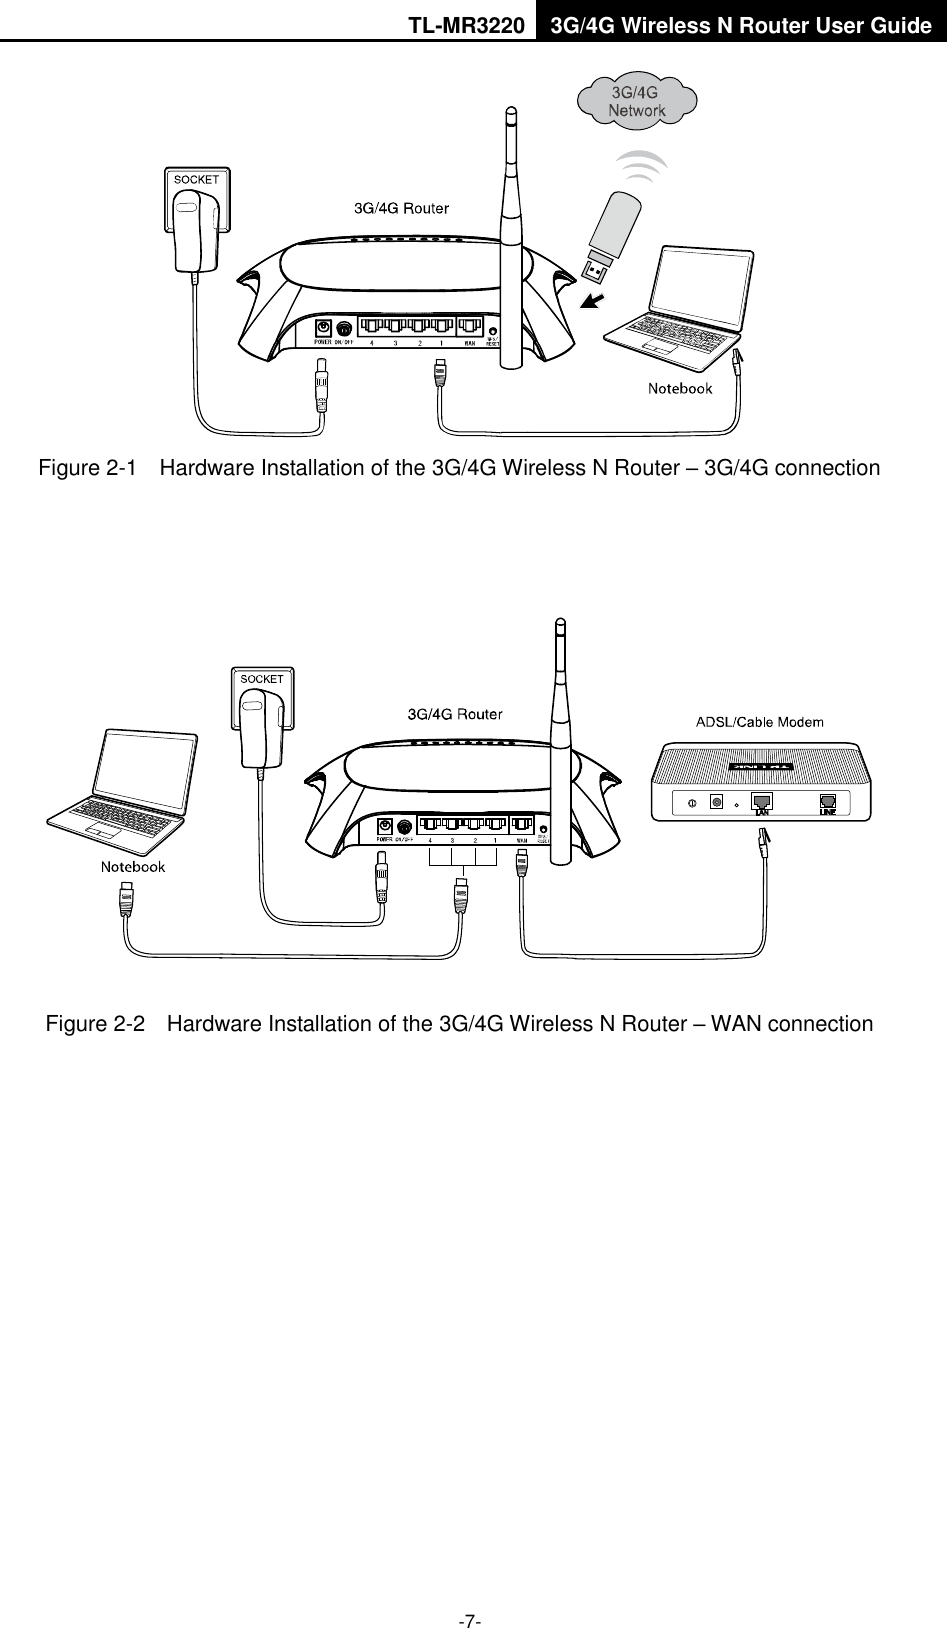 TL-MR3220 3G/4G Wireless N Router User Guide  -7-  Figure 2-1  Hardware Installation of the 3G/4G Wireless N Router – 3G/4G connection     Figure 2-2  Hardware Installation of the 3G/4G Wireless N Router – WAN connection  